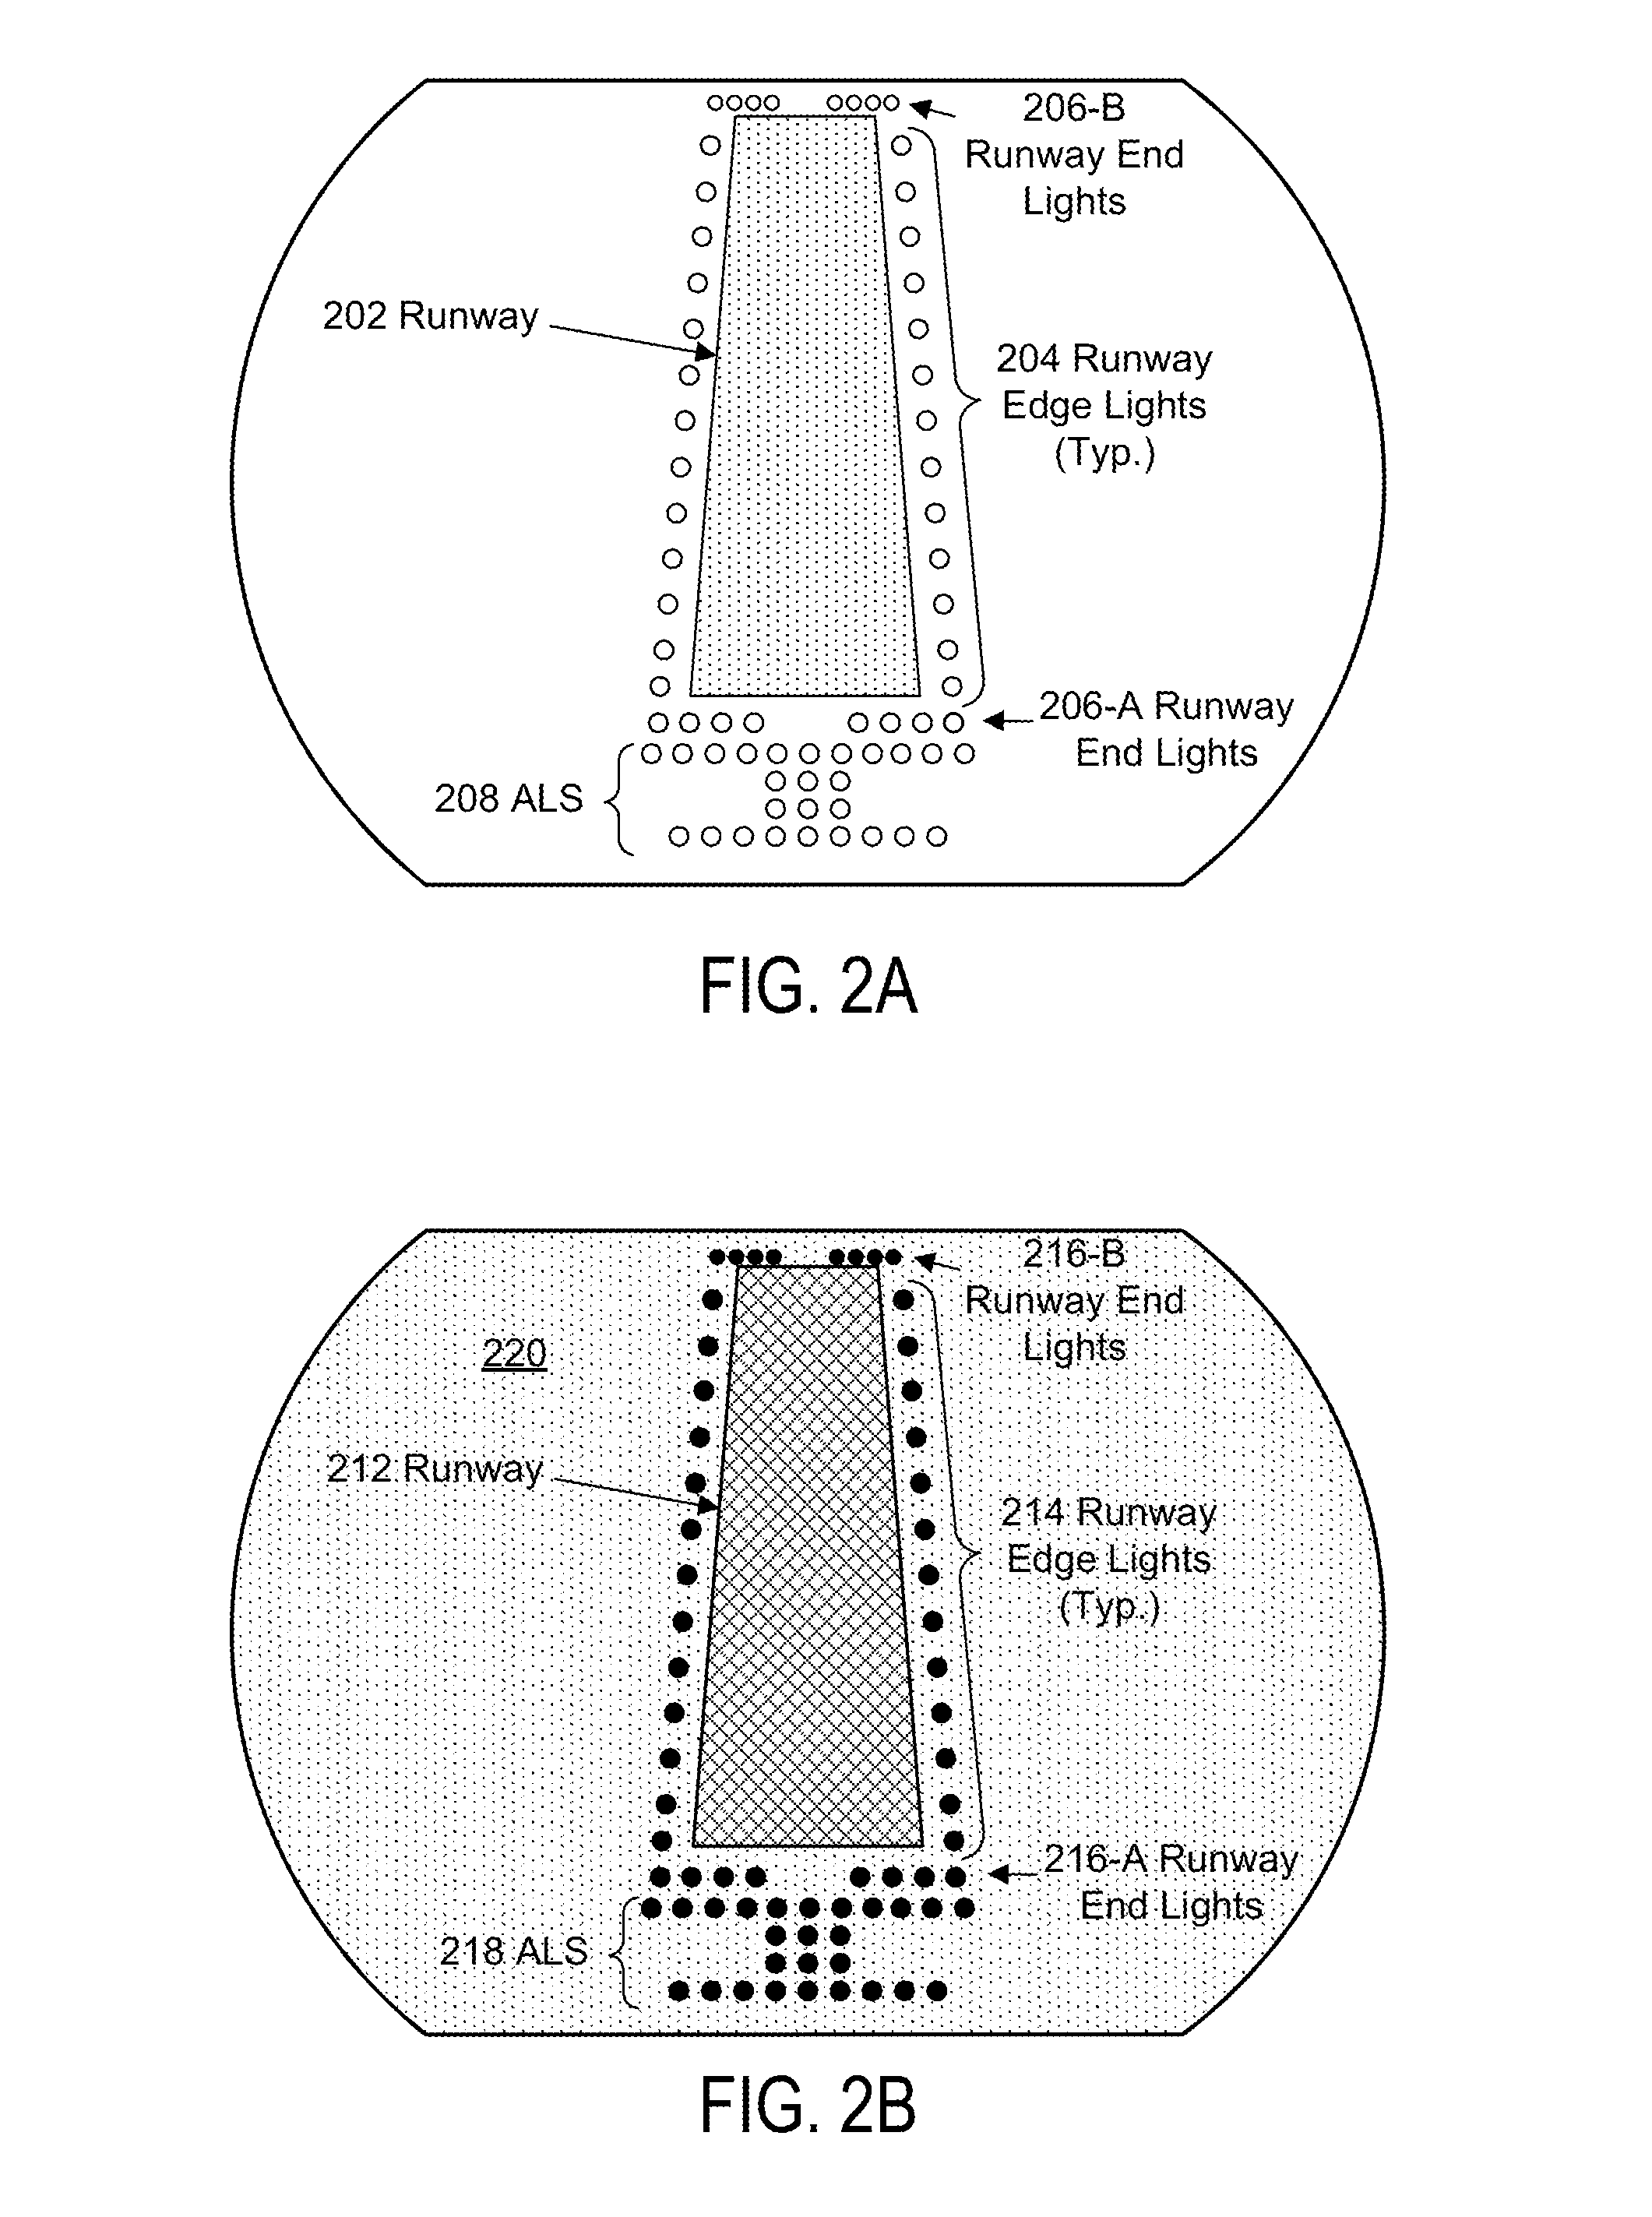 Visual aid generating system, device, and method